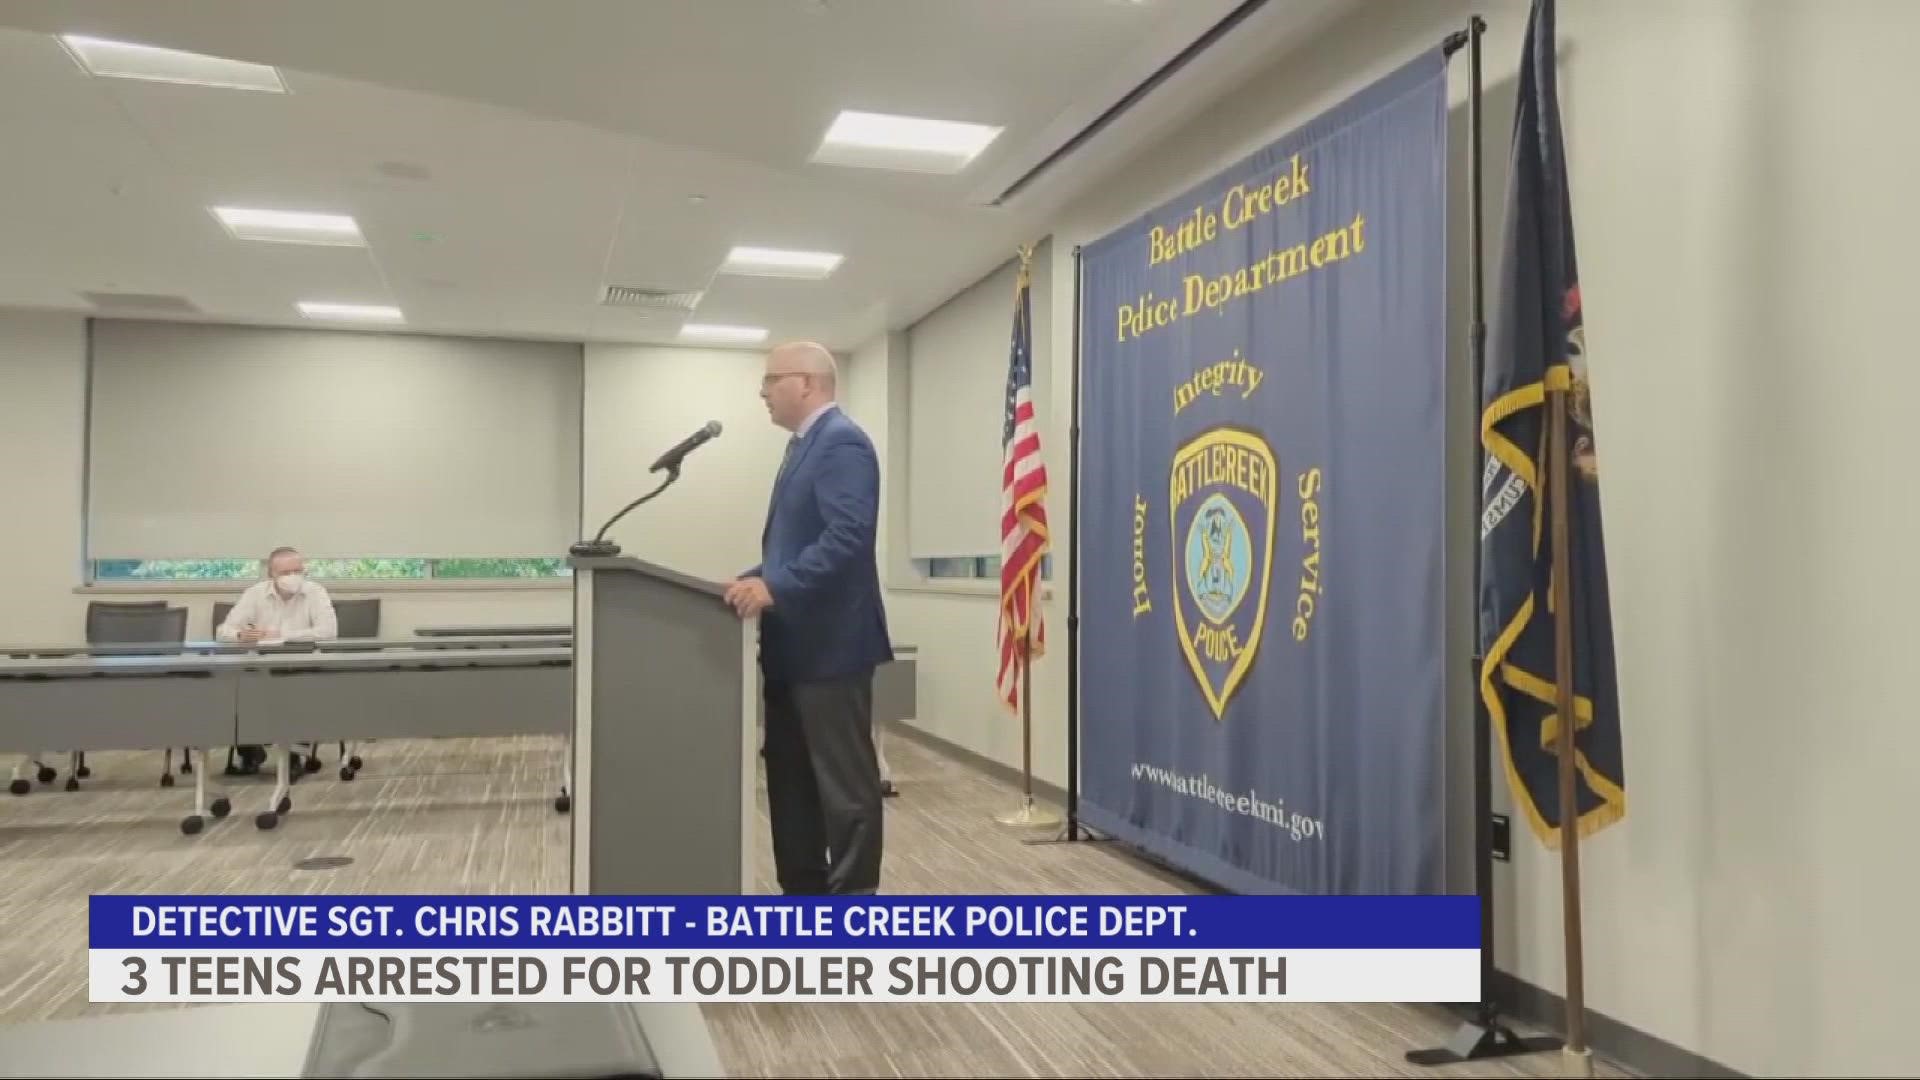 Police say three teenagers will face open murder and firearms charges in connection to the death of a 2-year-old.